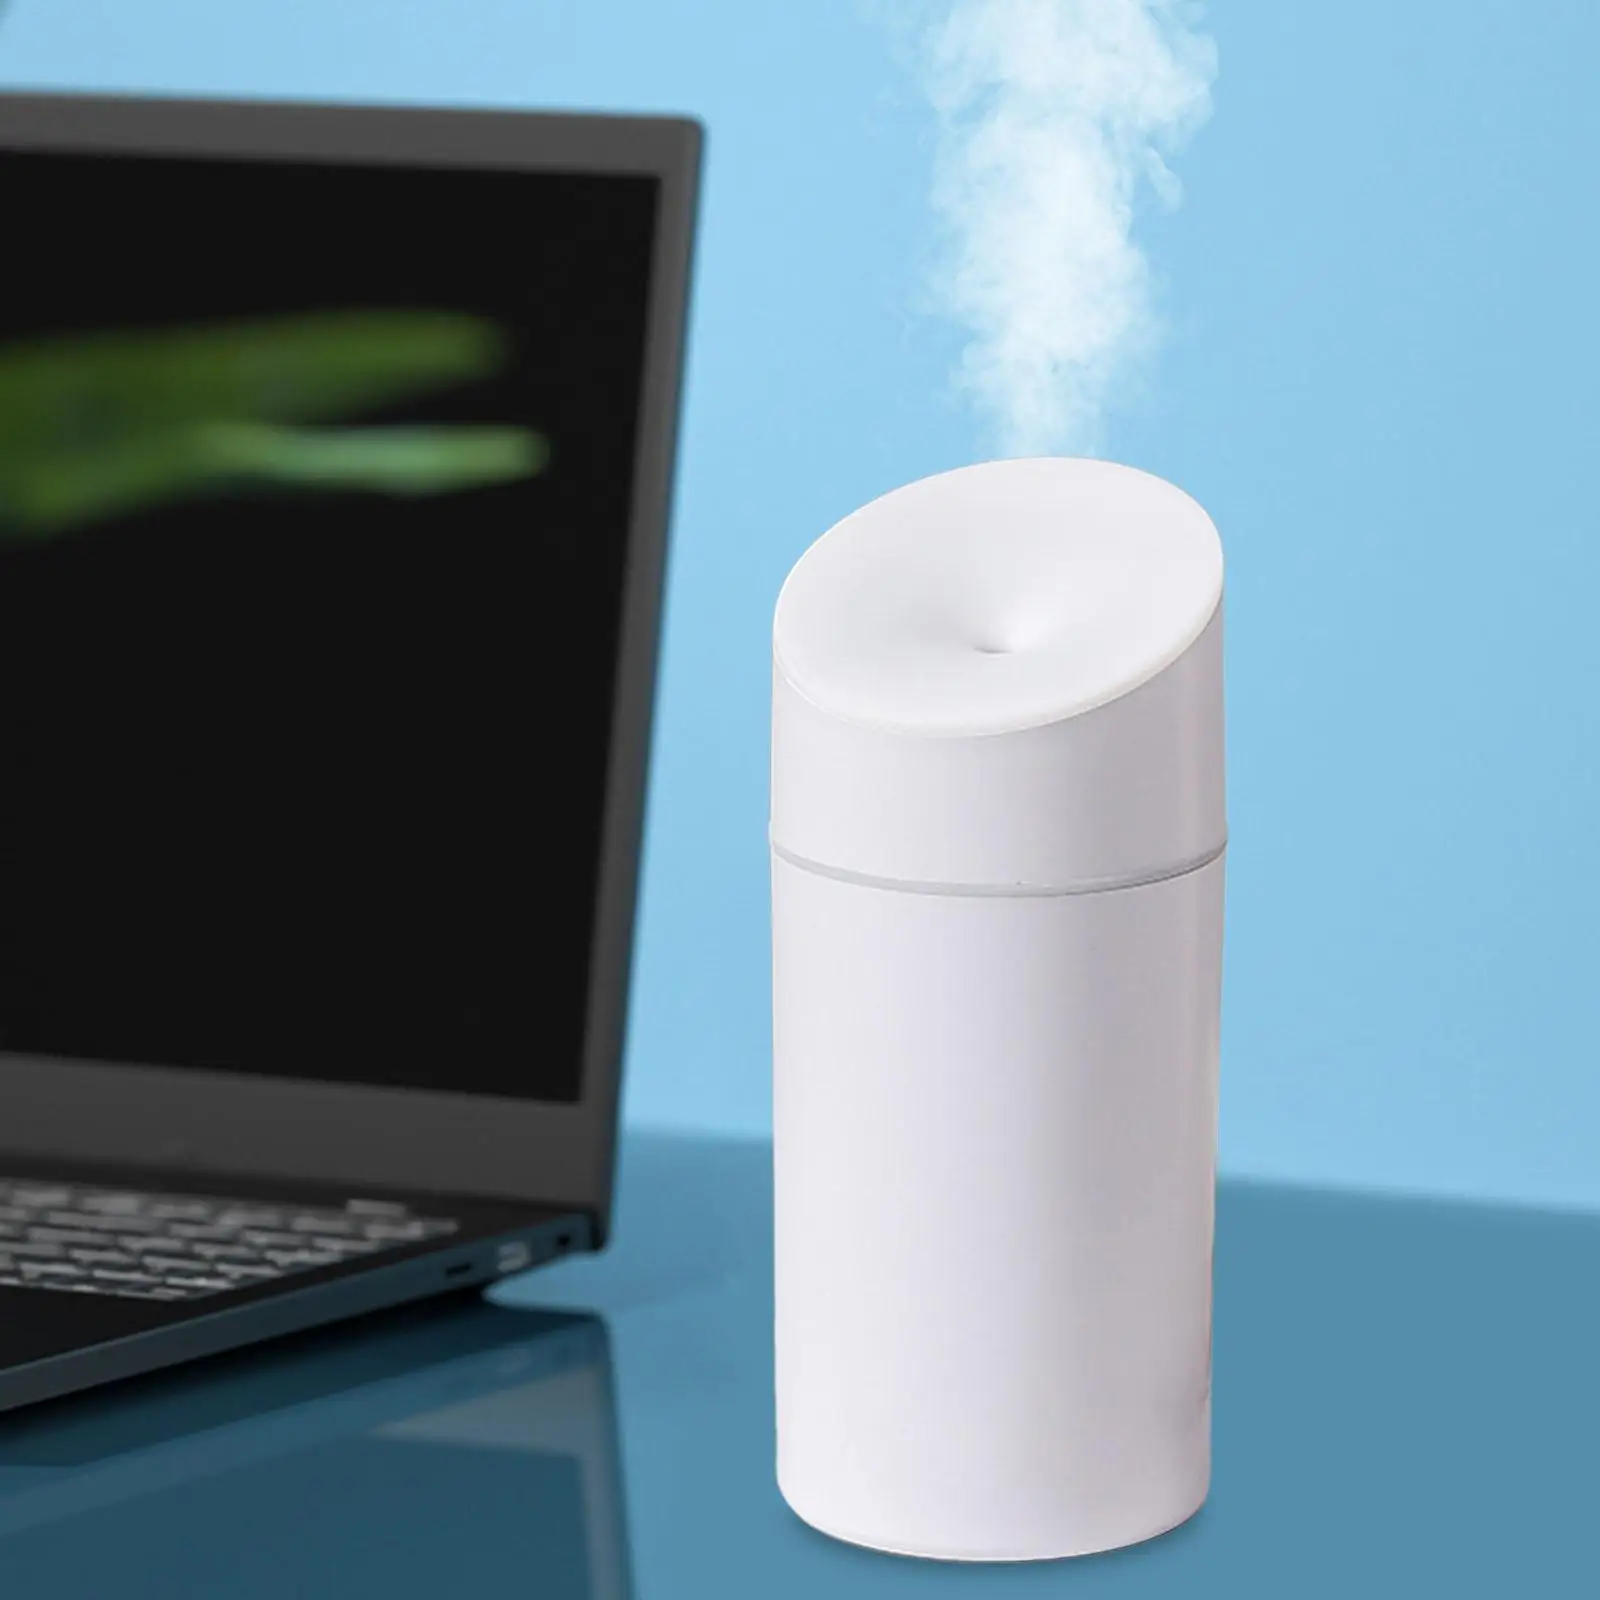 Mini Air Humidifier USB with Night Light essential Oil Diffuser for Aroma Quiet Operation mist for Desk